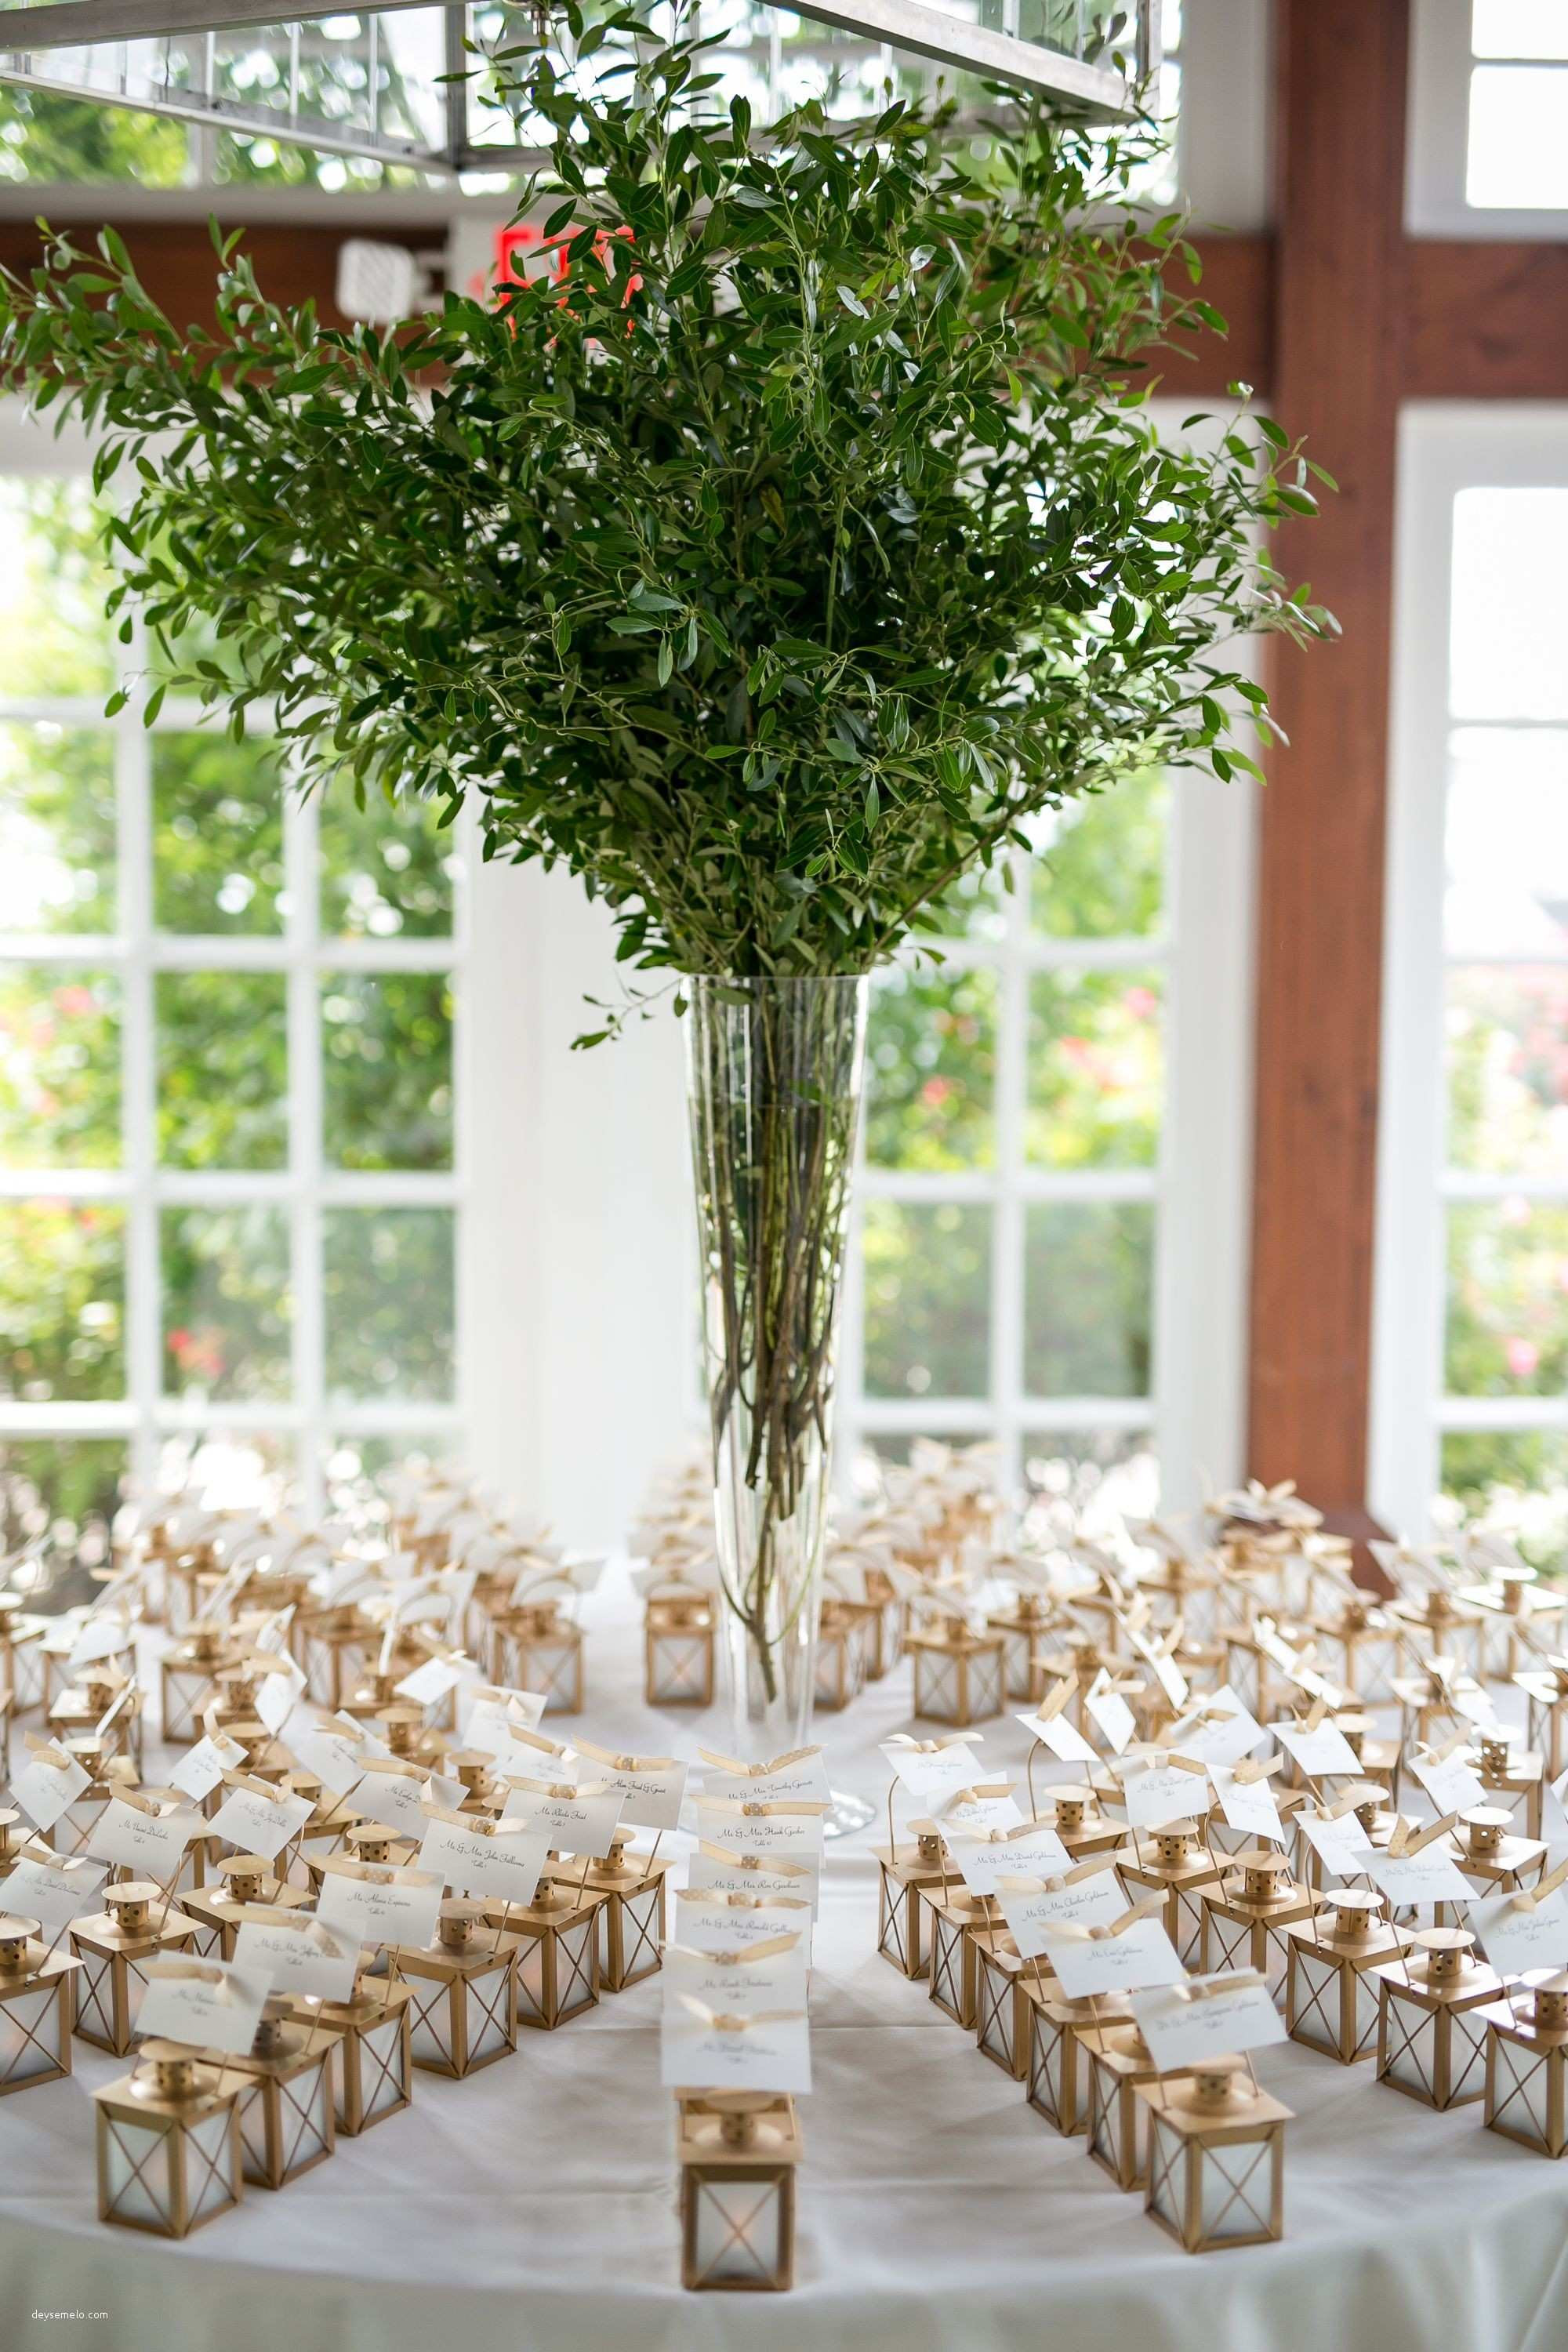 12 Fantastic Diy Decorative Flower Vases 2022 free download diy decorative flower vases of elegant decorative lanterns for weddings of diy home decor vaseh with romantic decorative lanterns for weddings with greenery wedding placecards escort cards m